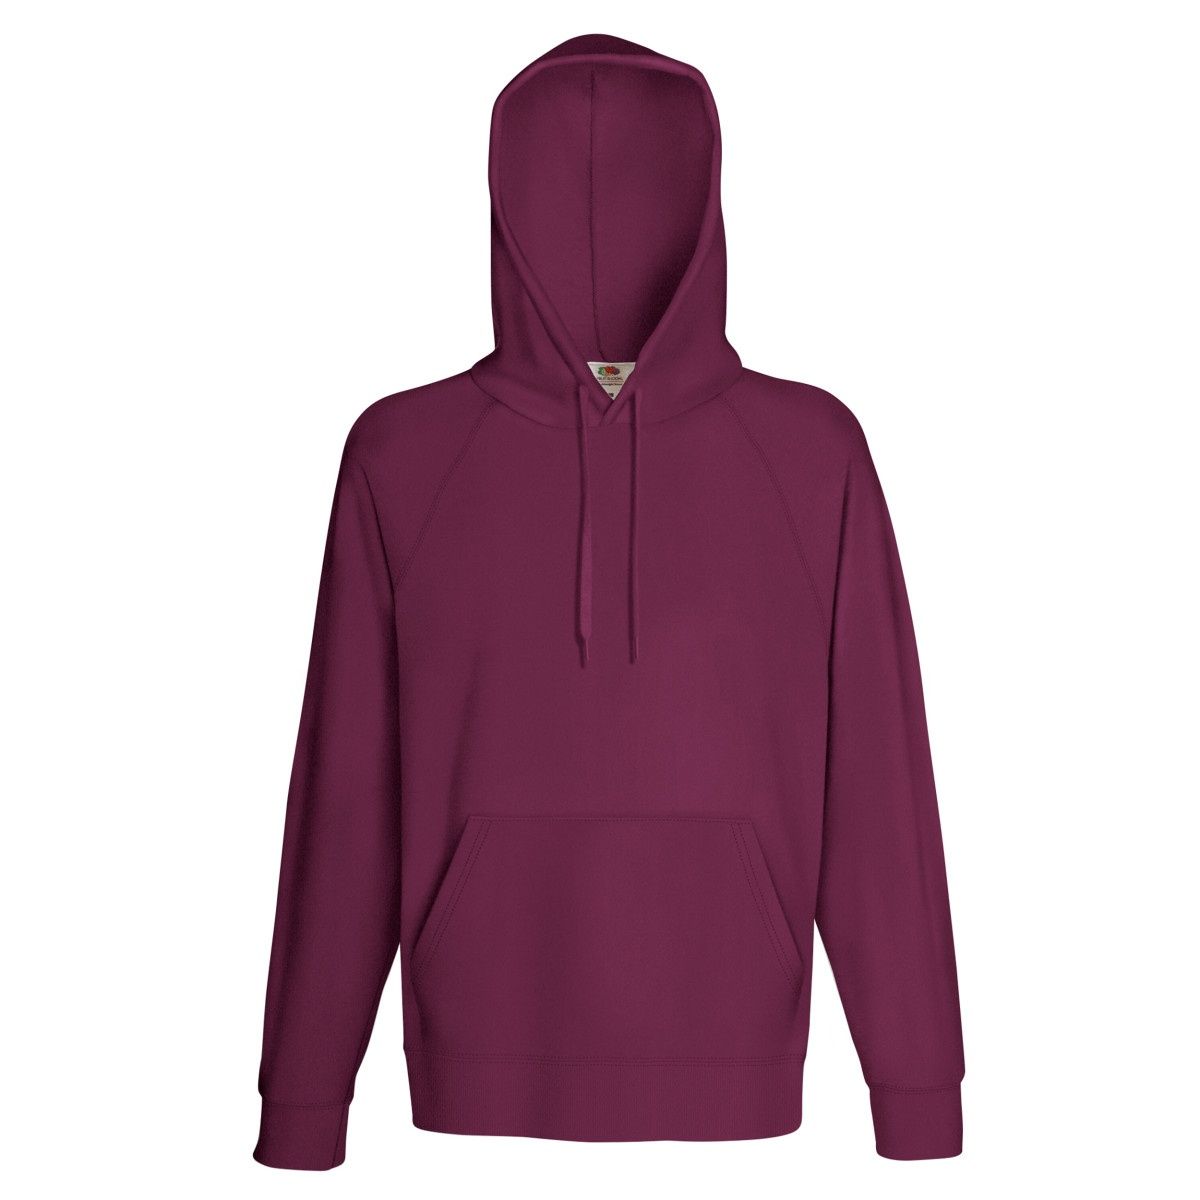 Lightweight unbrushed fleece. Raglan sleeves. Hood with self coloured flat draw cord. Front pouch pocket. Waist and cuff in Cotton/Lycra® rib. Produced using Belcoro® yarn for a softer feel and cleaner printing process. Weight: 240g/m². Fabric: 80% Cotton 20% Polyester. Size: 2XL (Chest To Fit (ins): 47-49). Size: L (Chest To Fit (ins): 41-43). Size: M (Chest To Fit (ins): 38-40). Size: S (Chest To Fit (ins): 35-37). Size: XL (Chest To Fit (ins): 44-46).